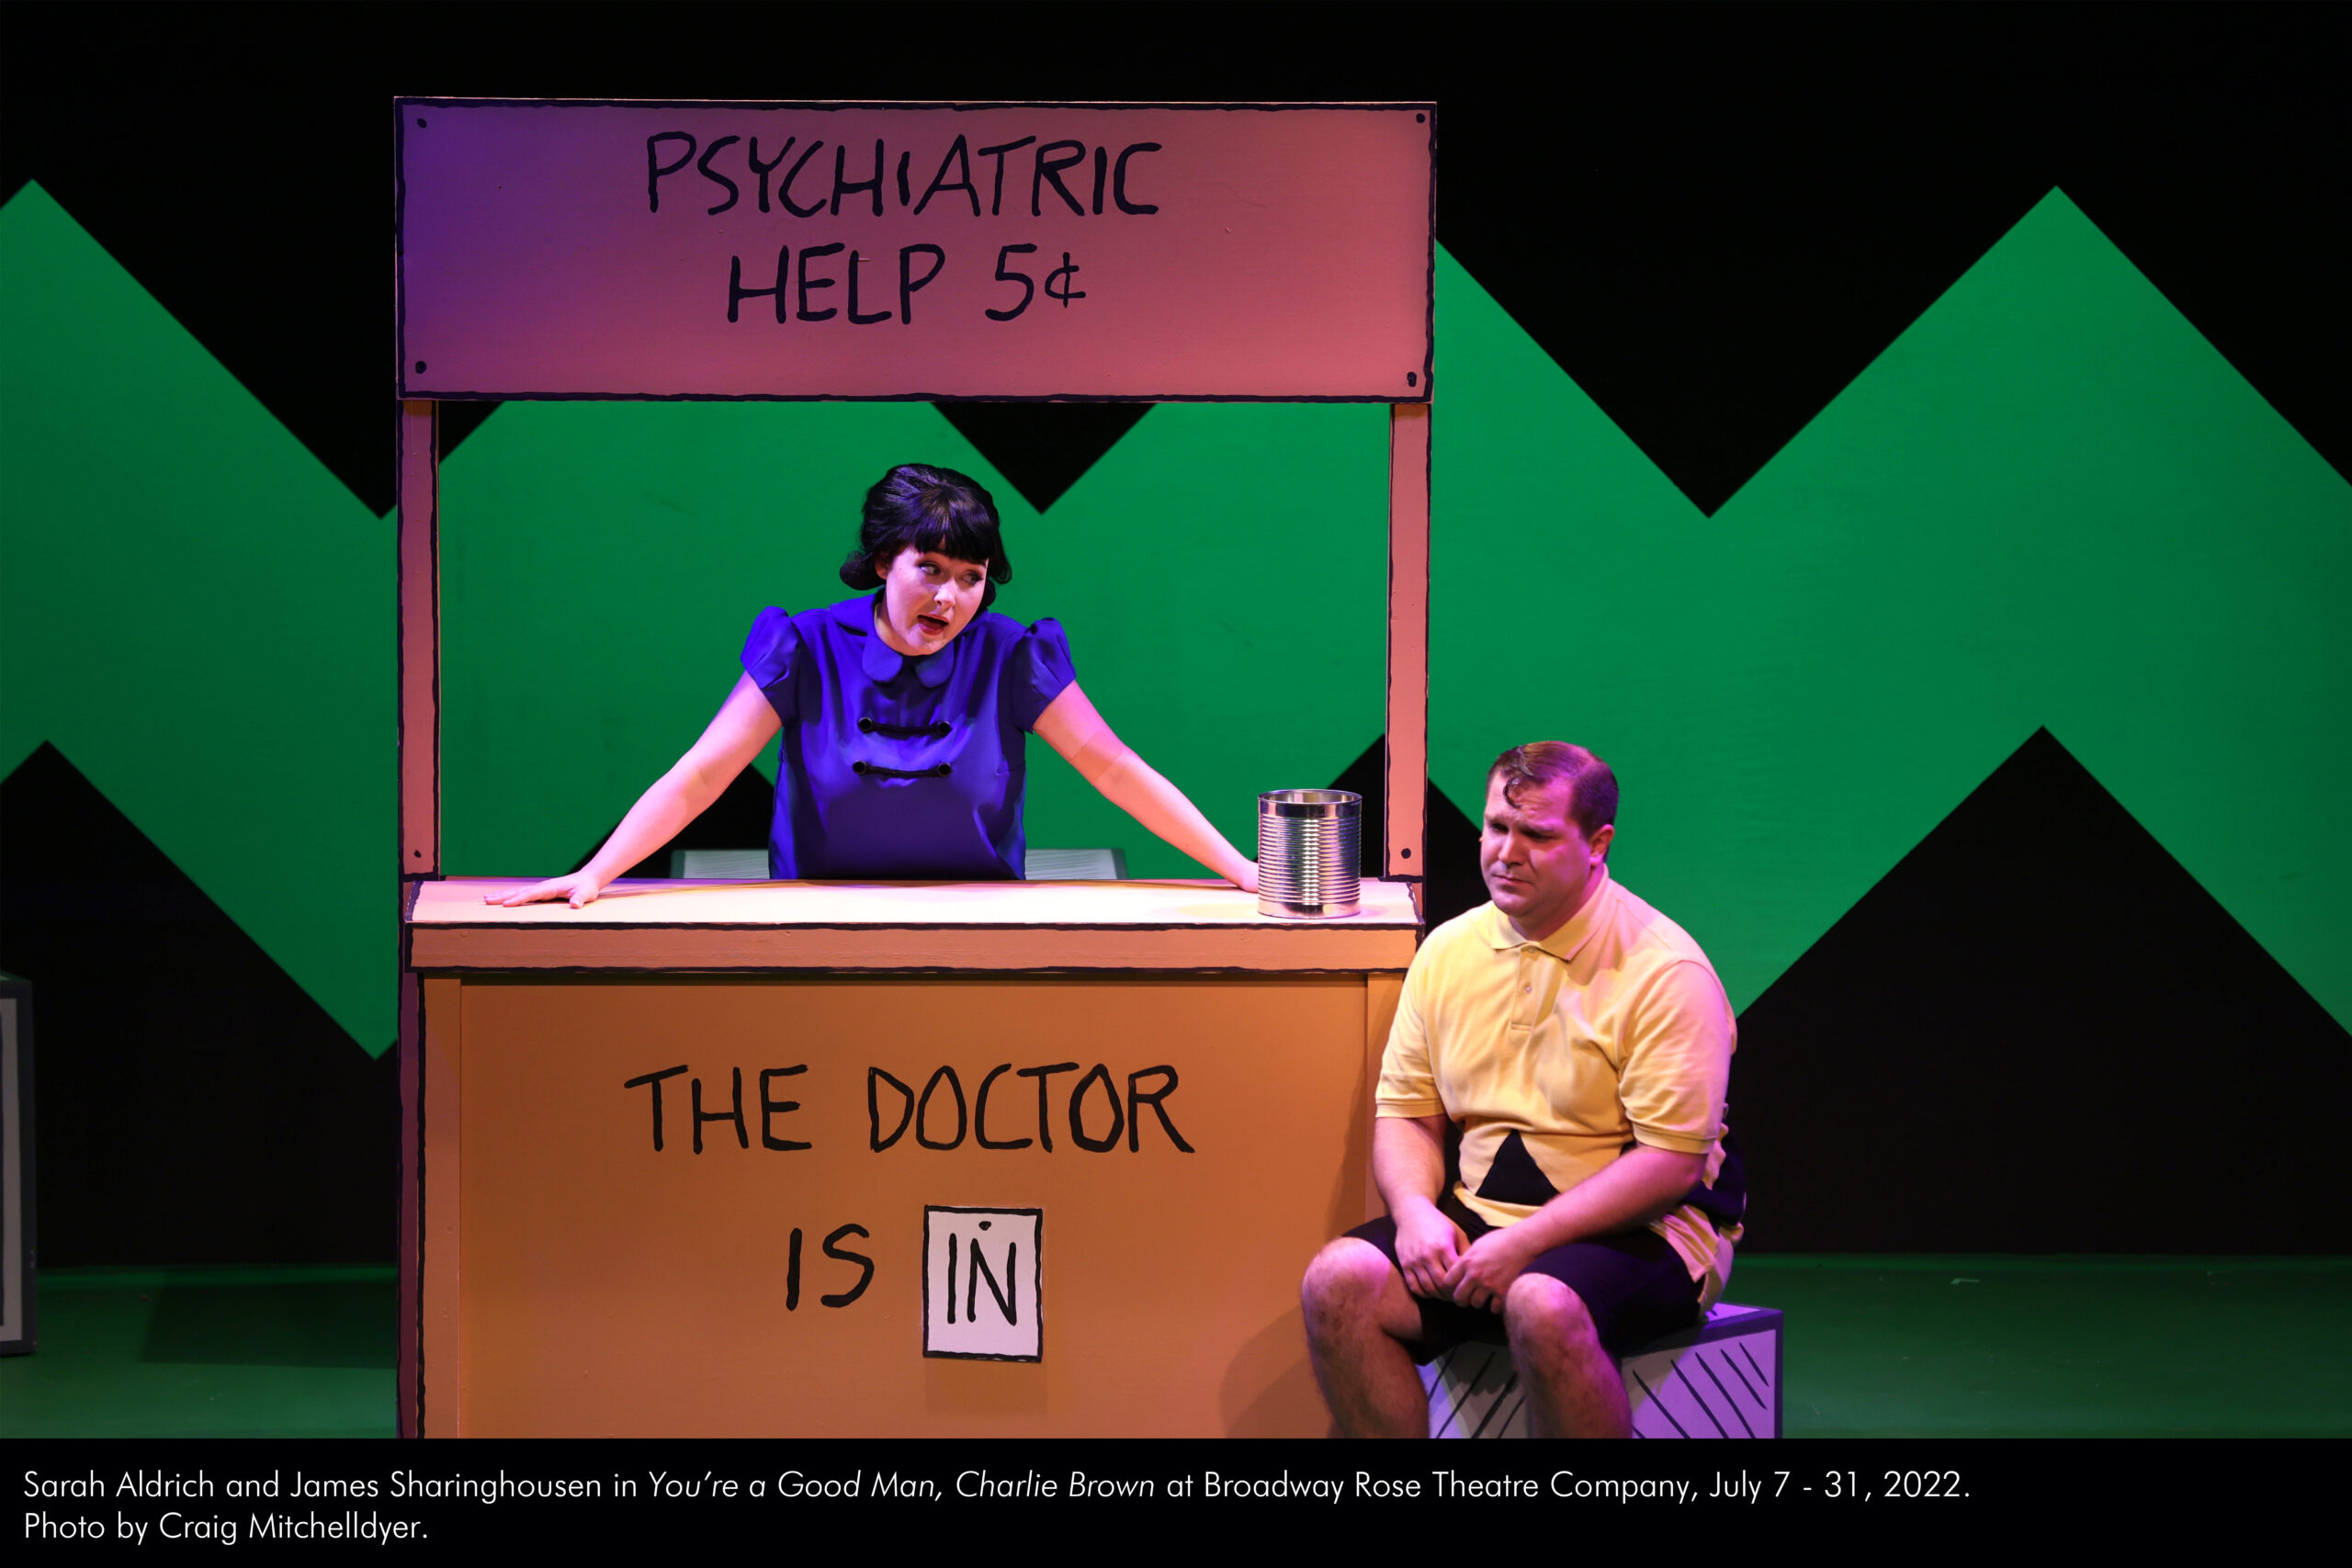 Sarah Aldrich and James Sharinghousen in "You're a Good Man, Charlie Brown". Photo by Craig Mitchelldyer.